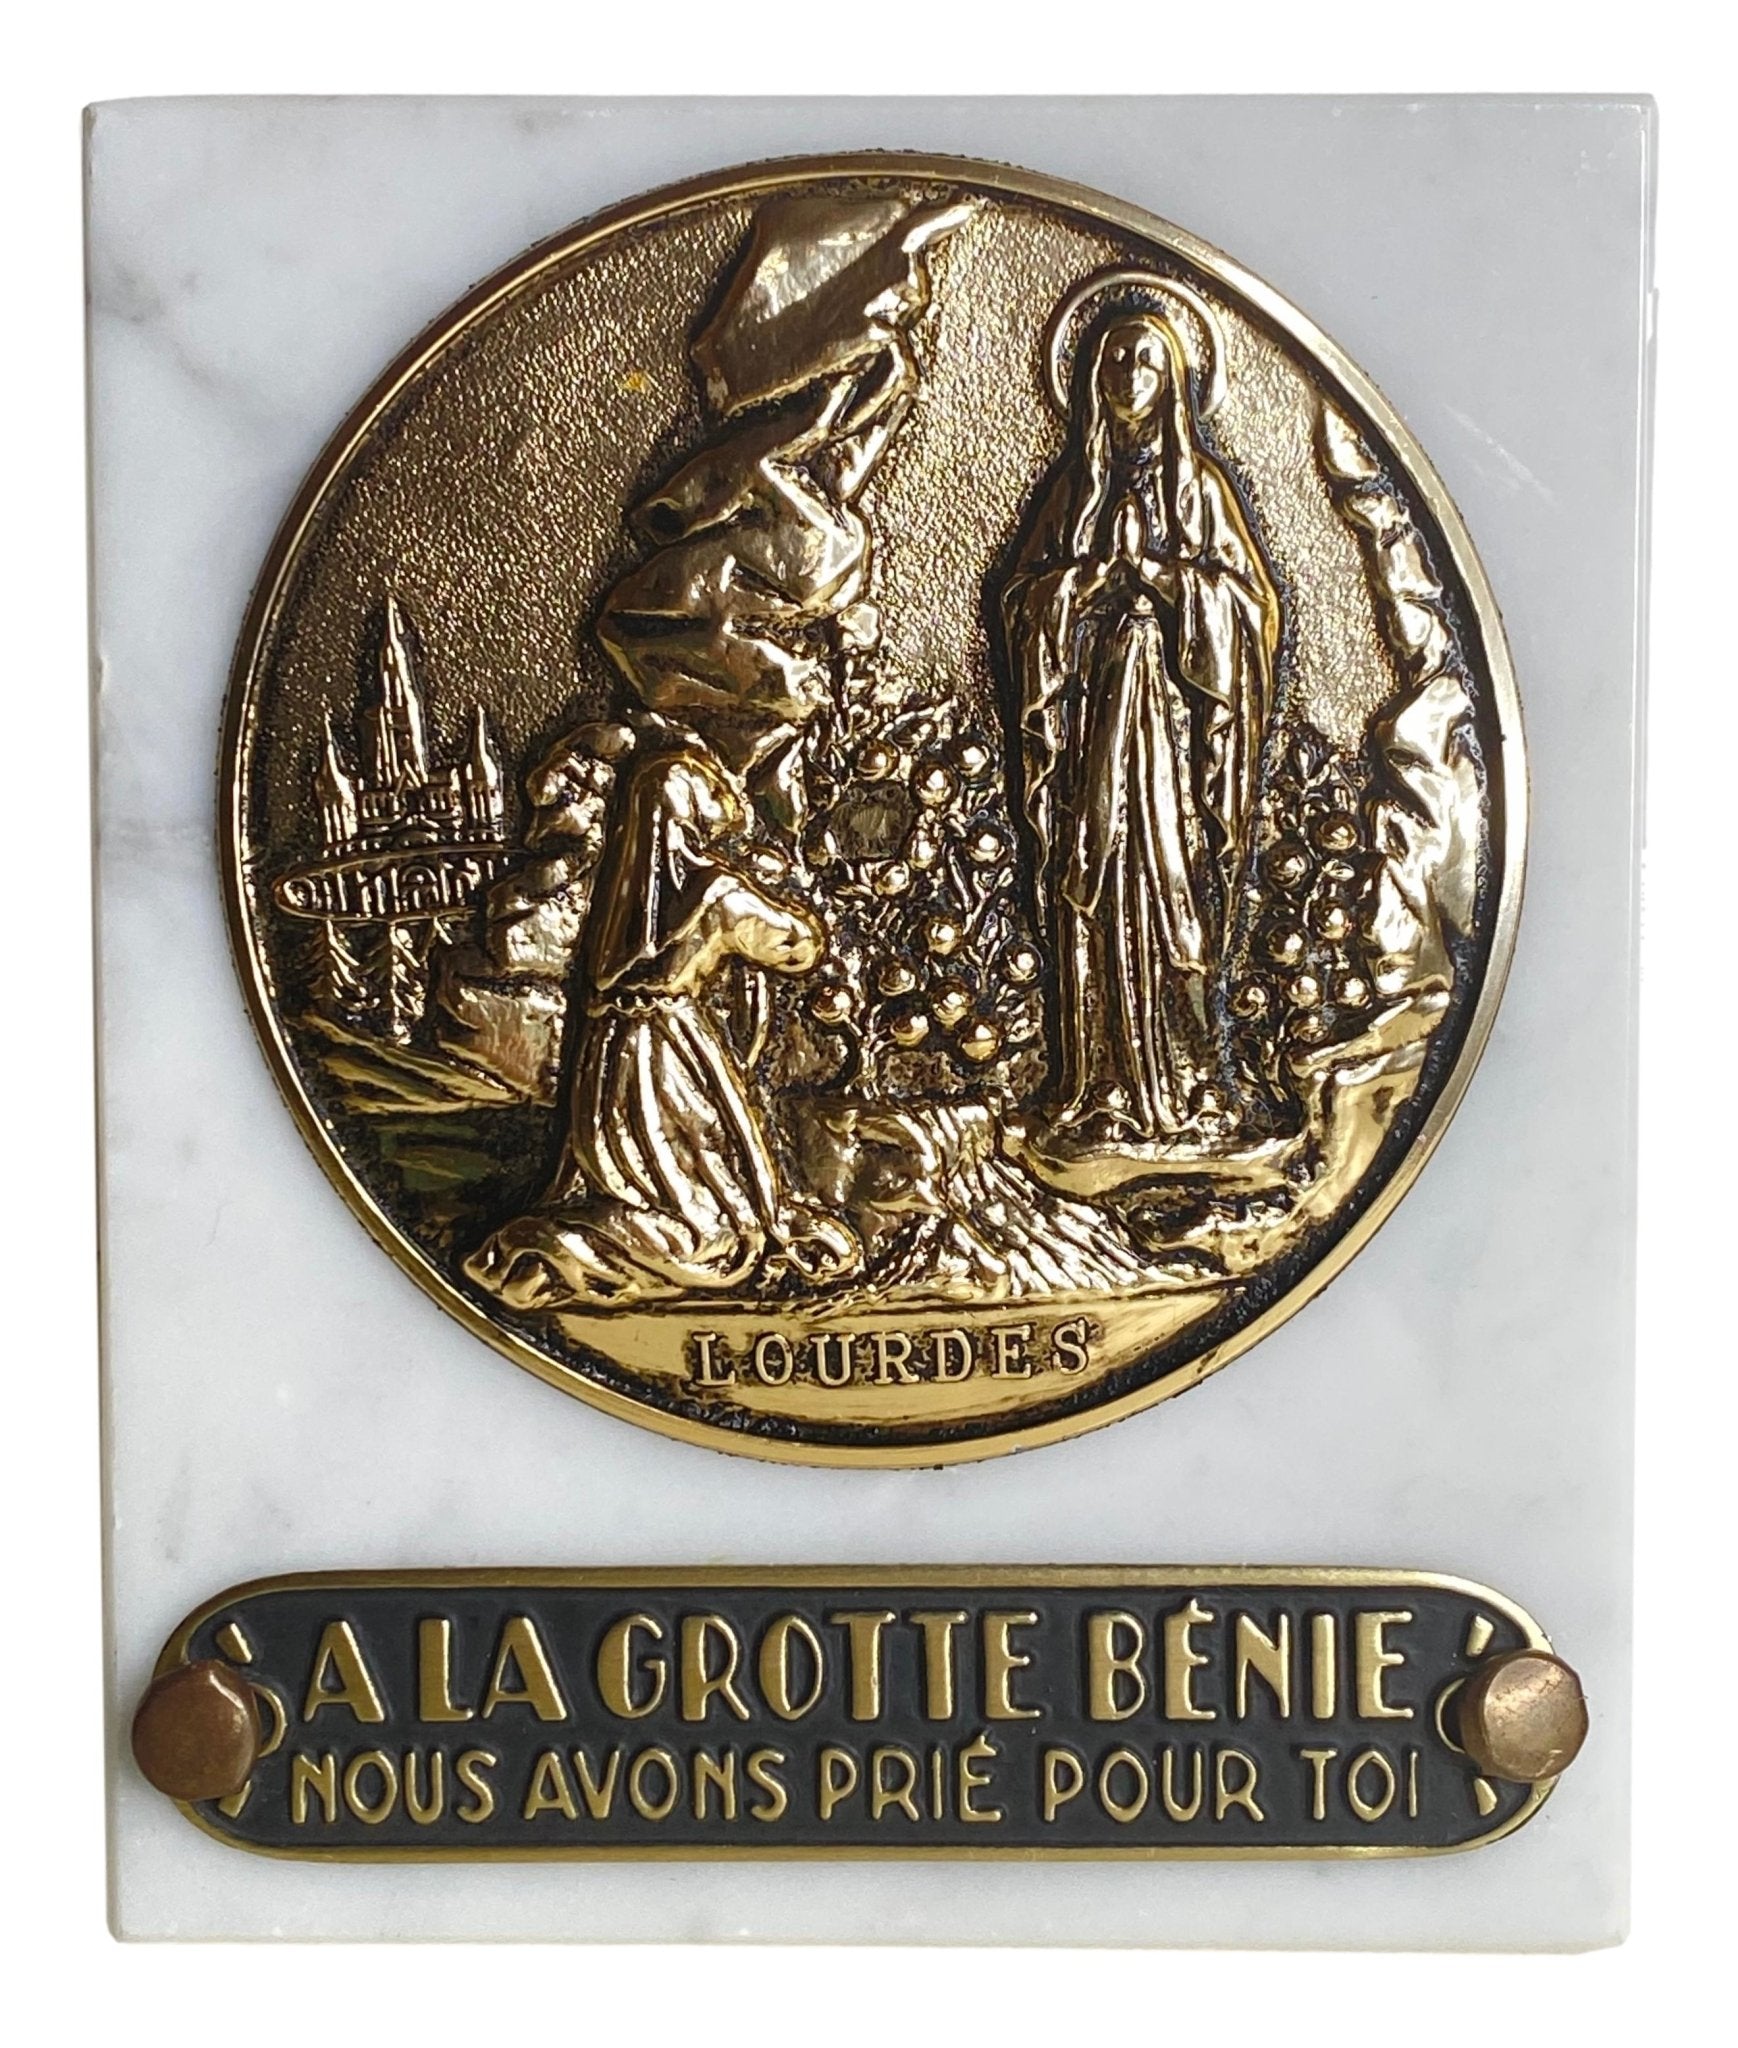 Plaque Our Lady of Lourdes At the Blessed Grotto We Prayed for You Marble Slab 4 L x 3/4 W x 5 H Inches - Ysleta Mission Gift Shop- VOTED 2022 El Paso's Best Gift Shop